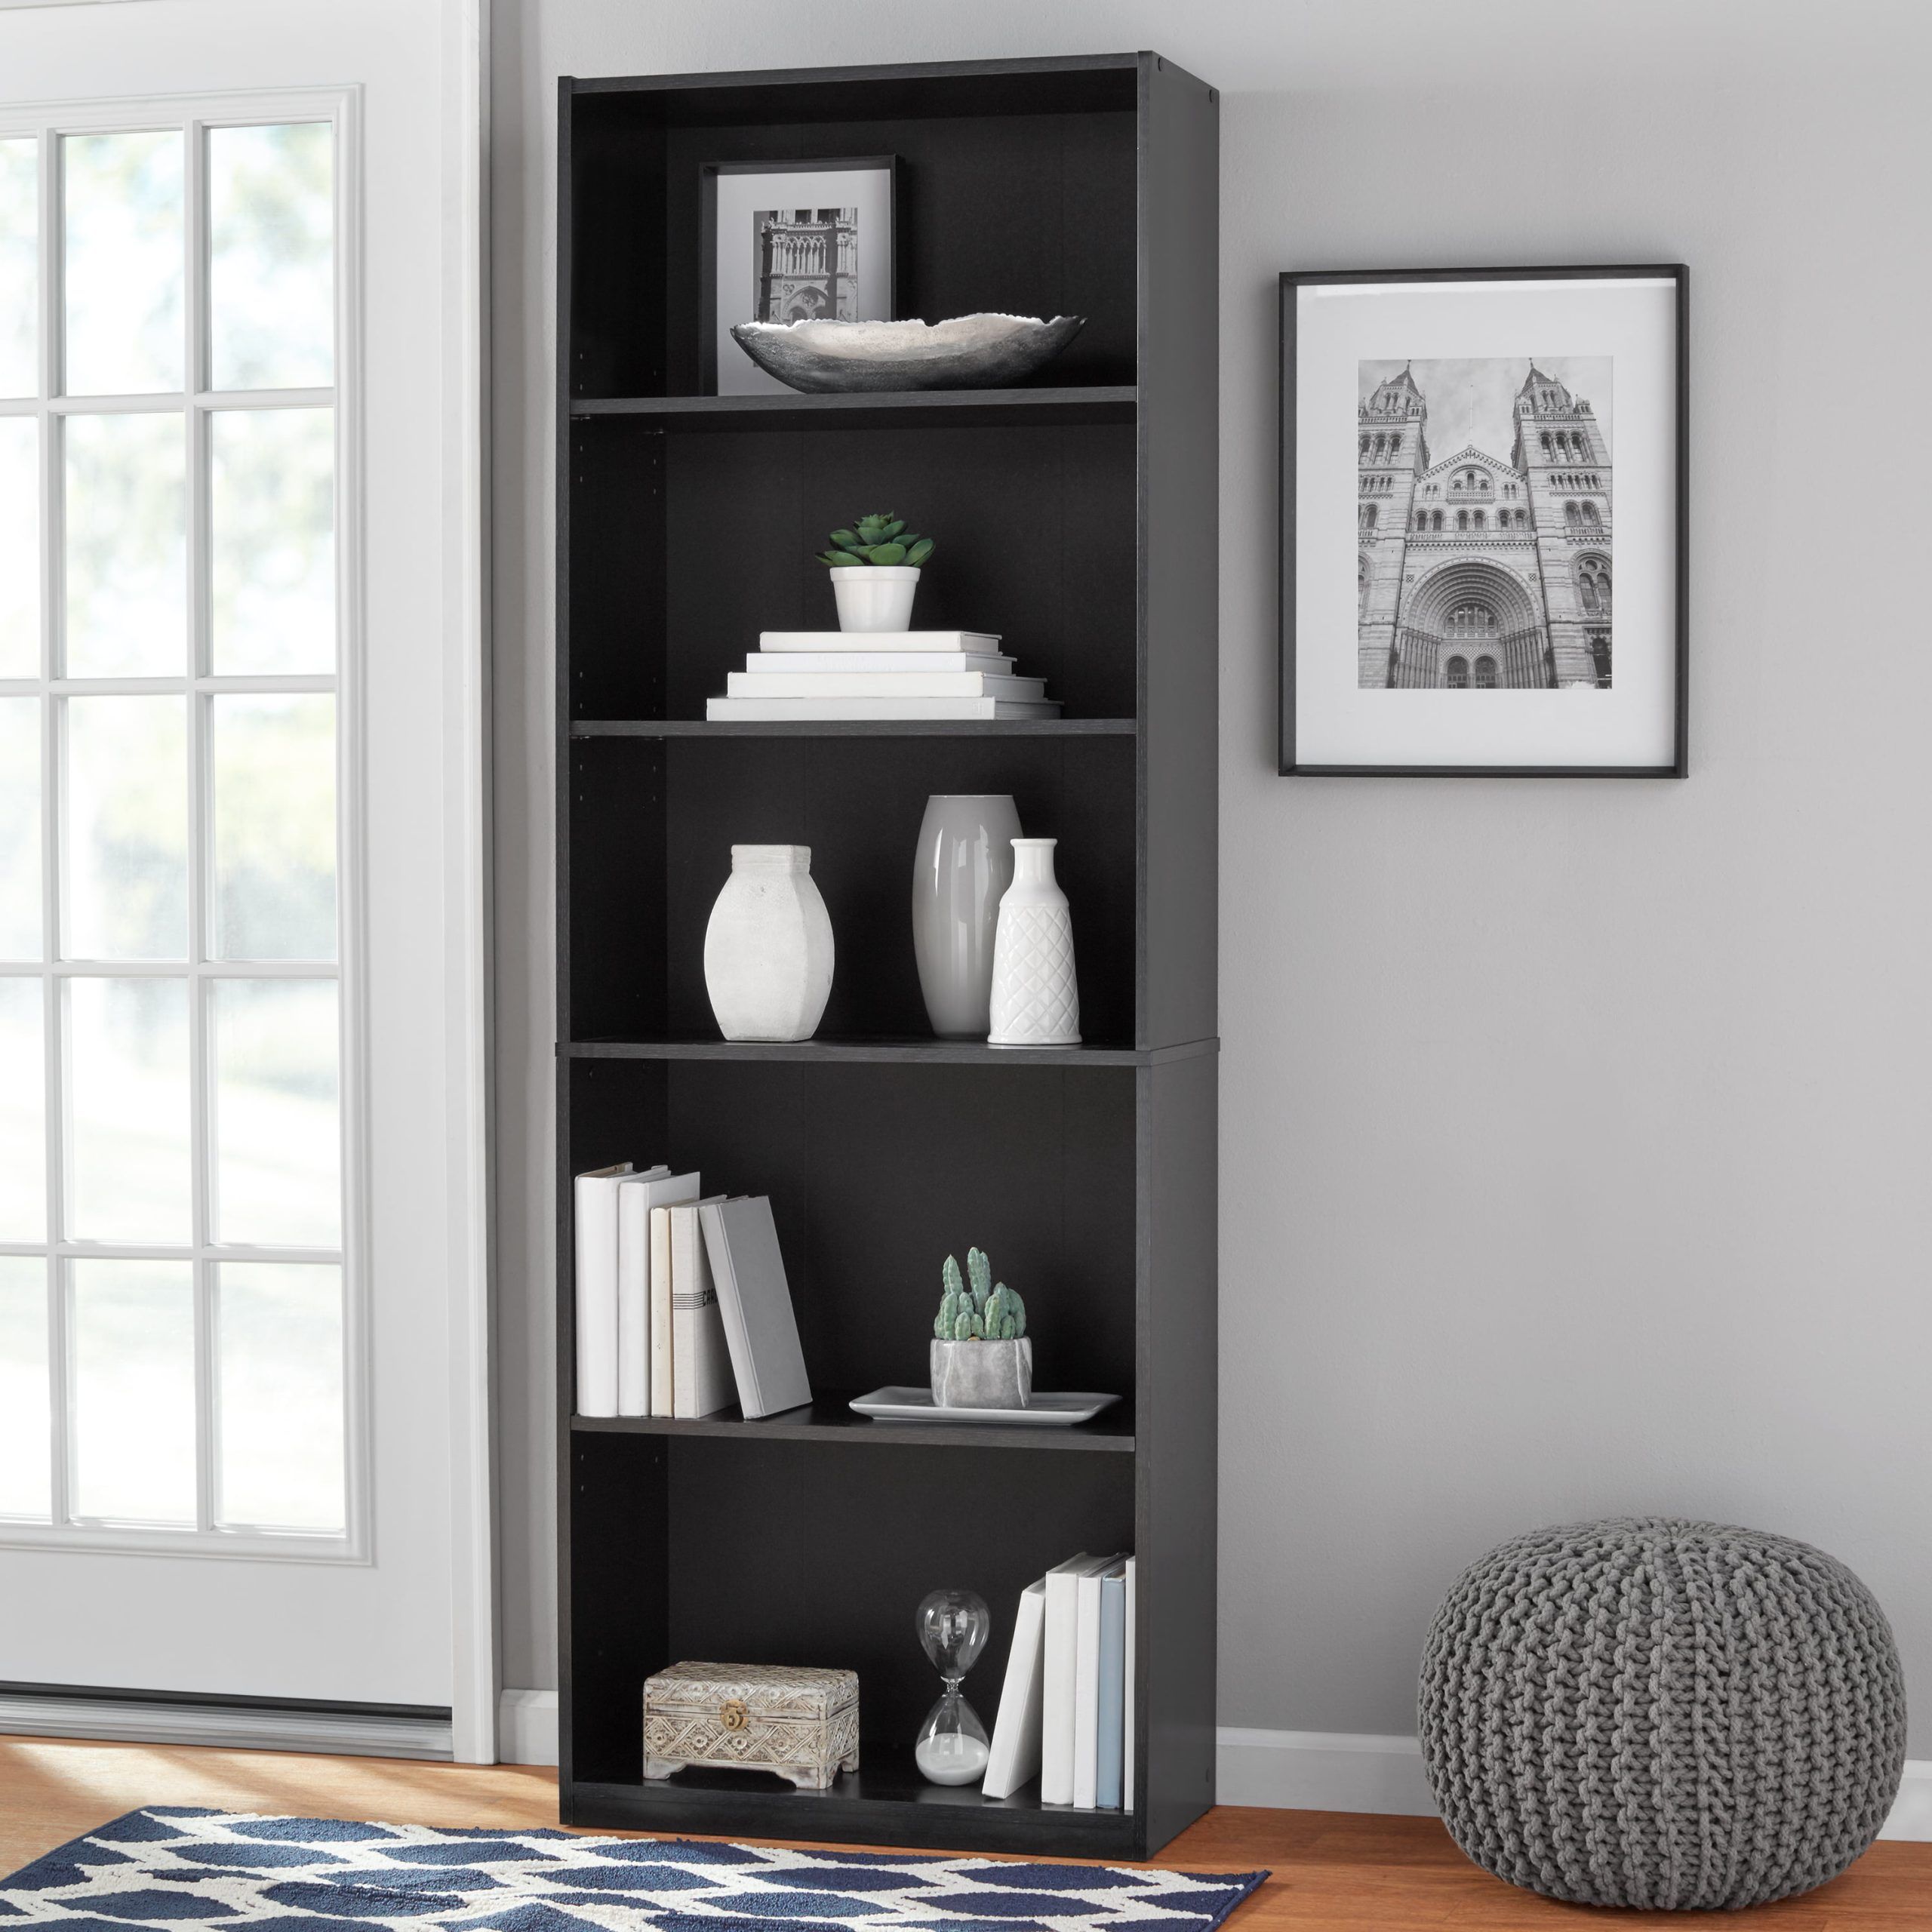 Mainstays 5 Shelf Bookcase With Adjustable Shelves, True Black Oak –  Walmart Intended For Bookcases With Five Shelves (View 4 of 15)